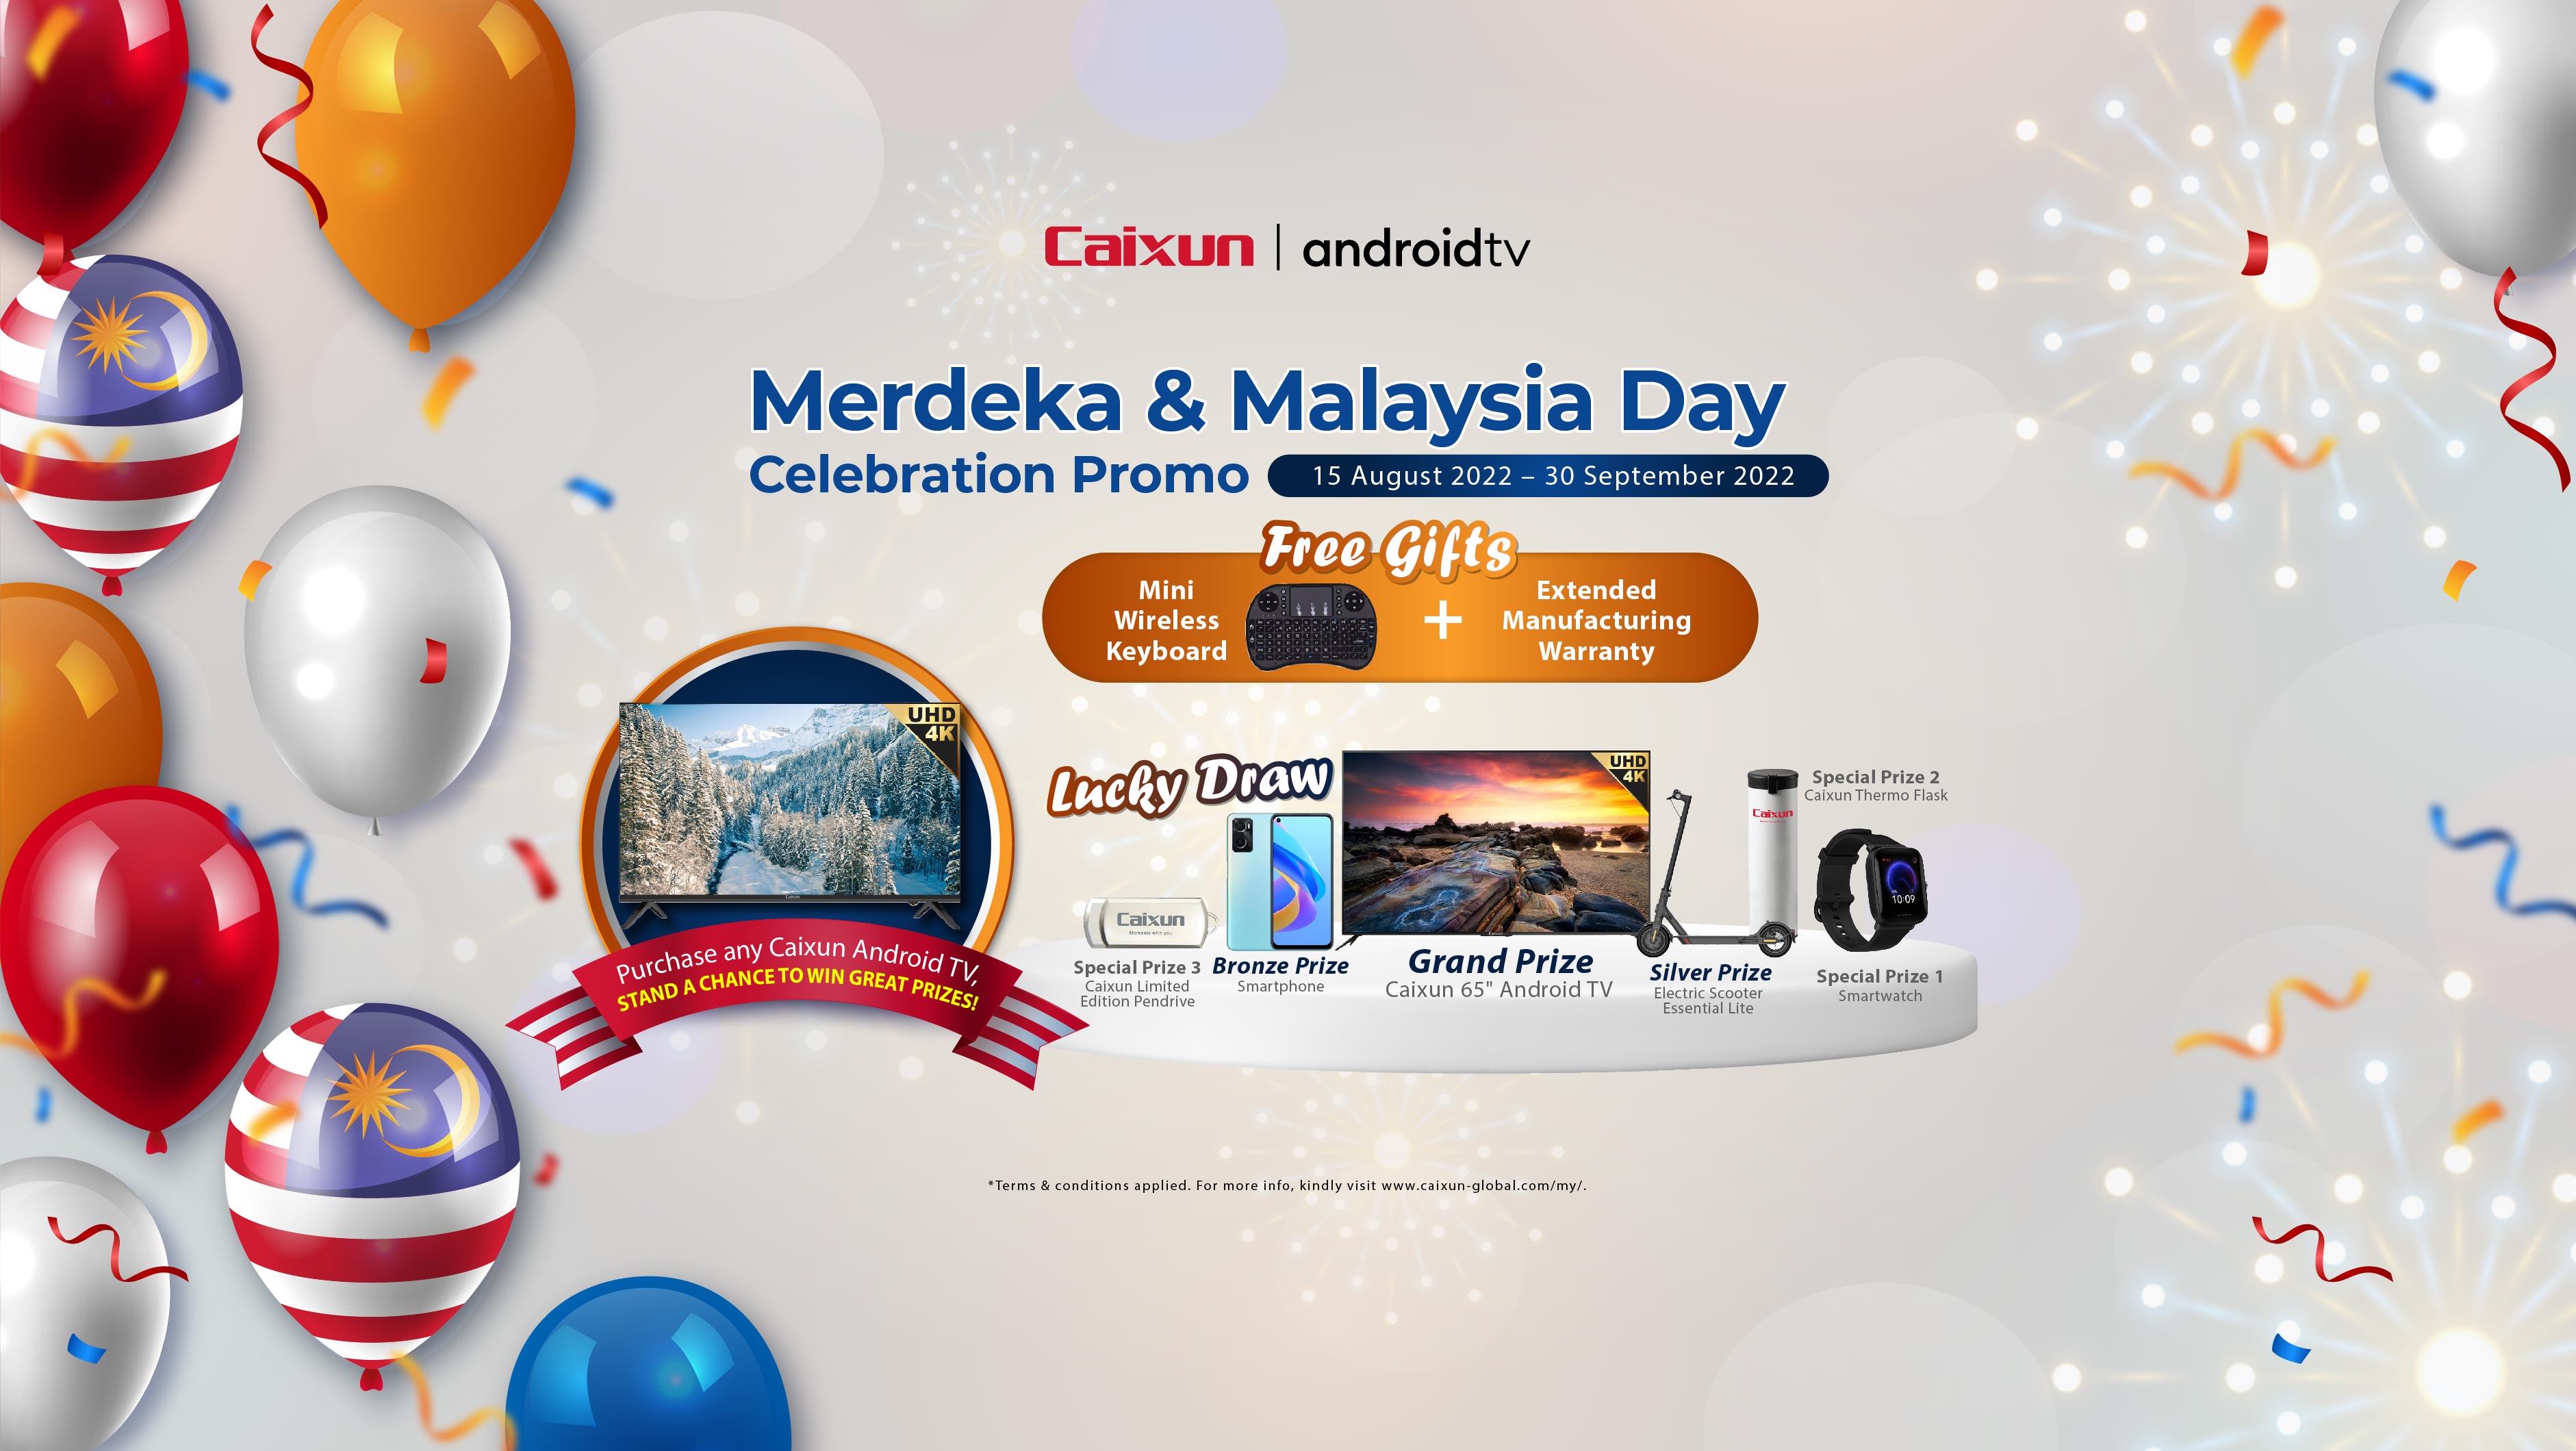 Caixun Merdeka & Malaysia Day 2022 Celebration Promo (How To Redeem & Campaign Full Terms and Conditions)